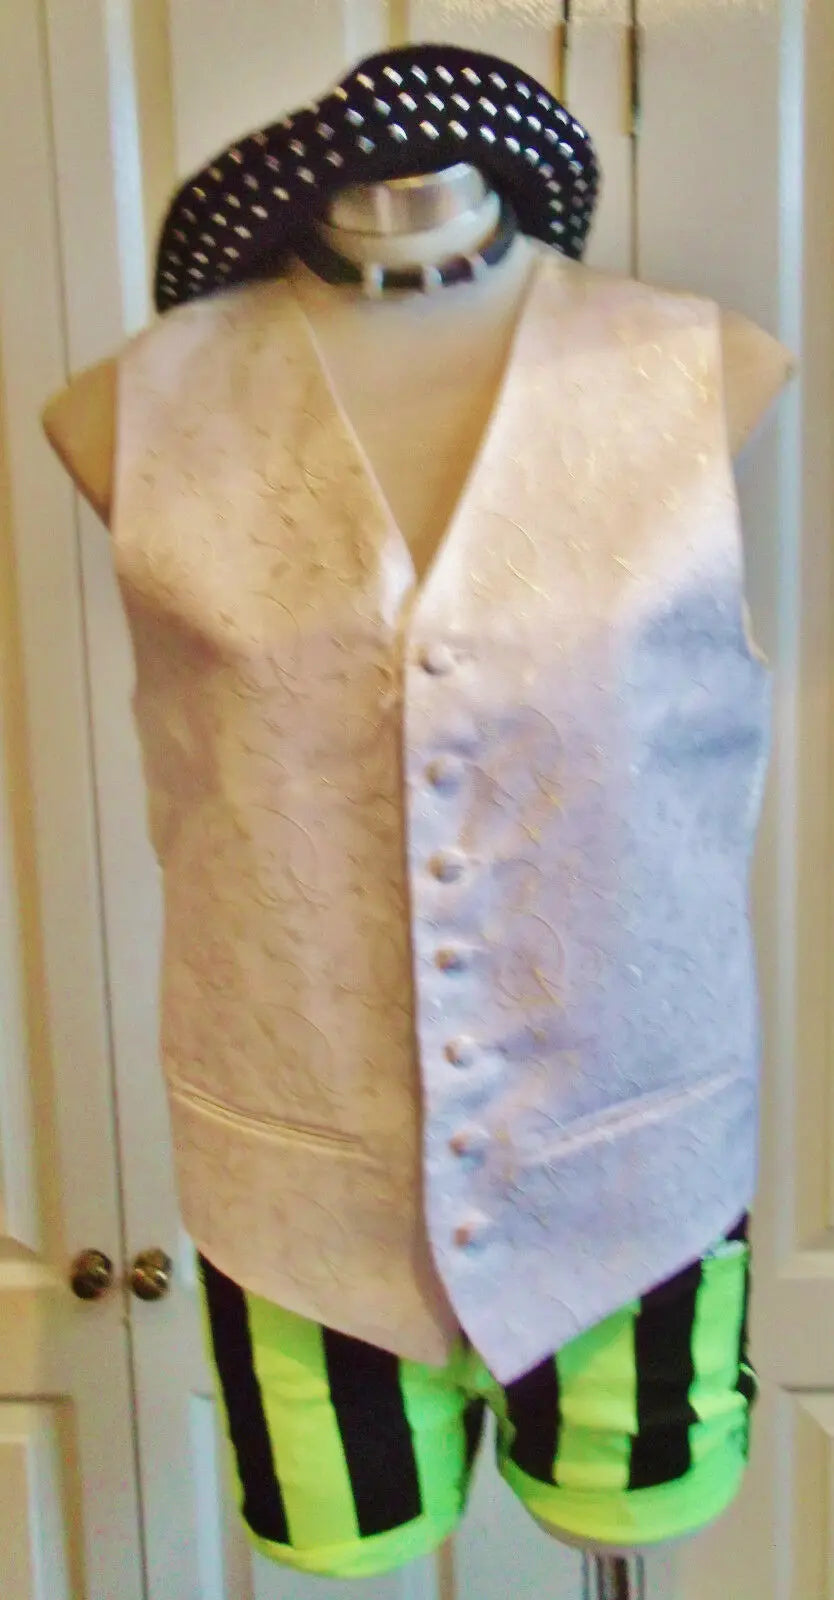 STEAMPUNKcream Vintage Waistcoat.satin back,embroidered fabric,linED.size38"cheS PISCADOR